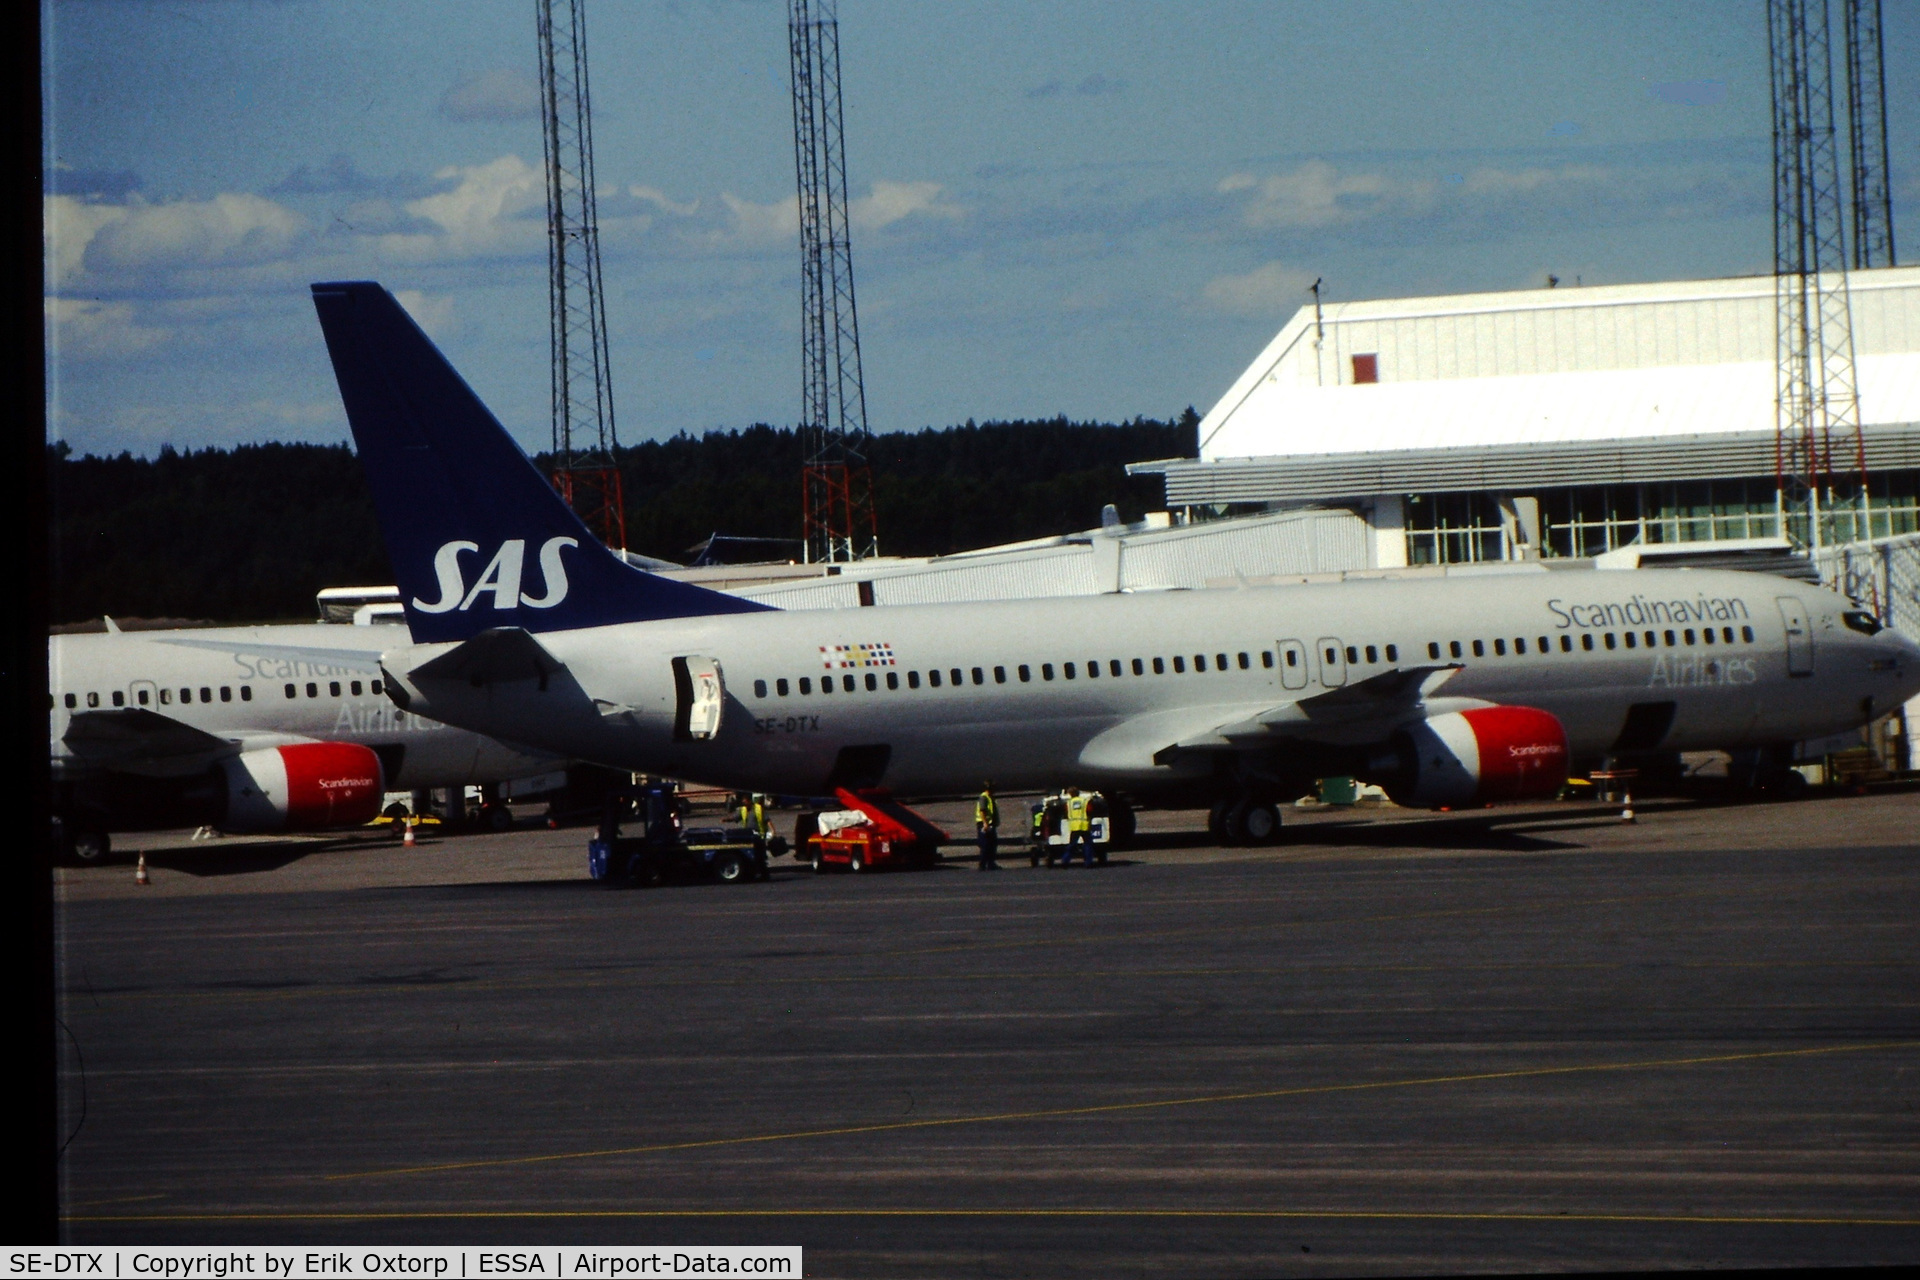 SE-DTX, 2000 Boeing 737-883 C/N 28321, SE-DTX at the domestic terminal in ARN